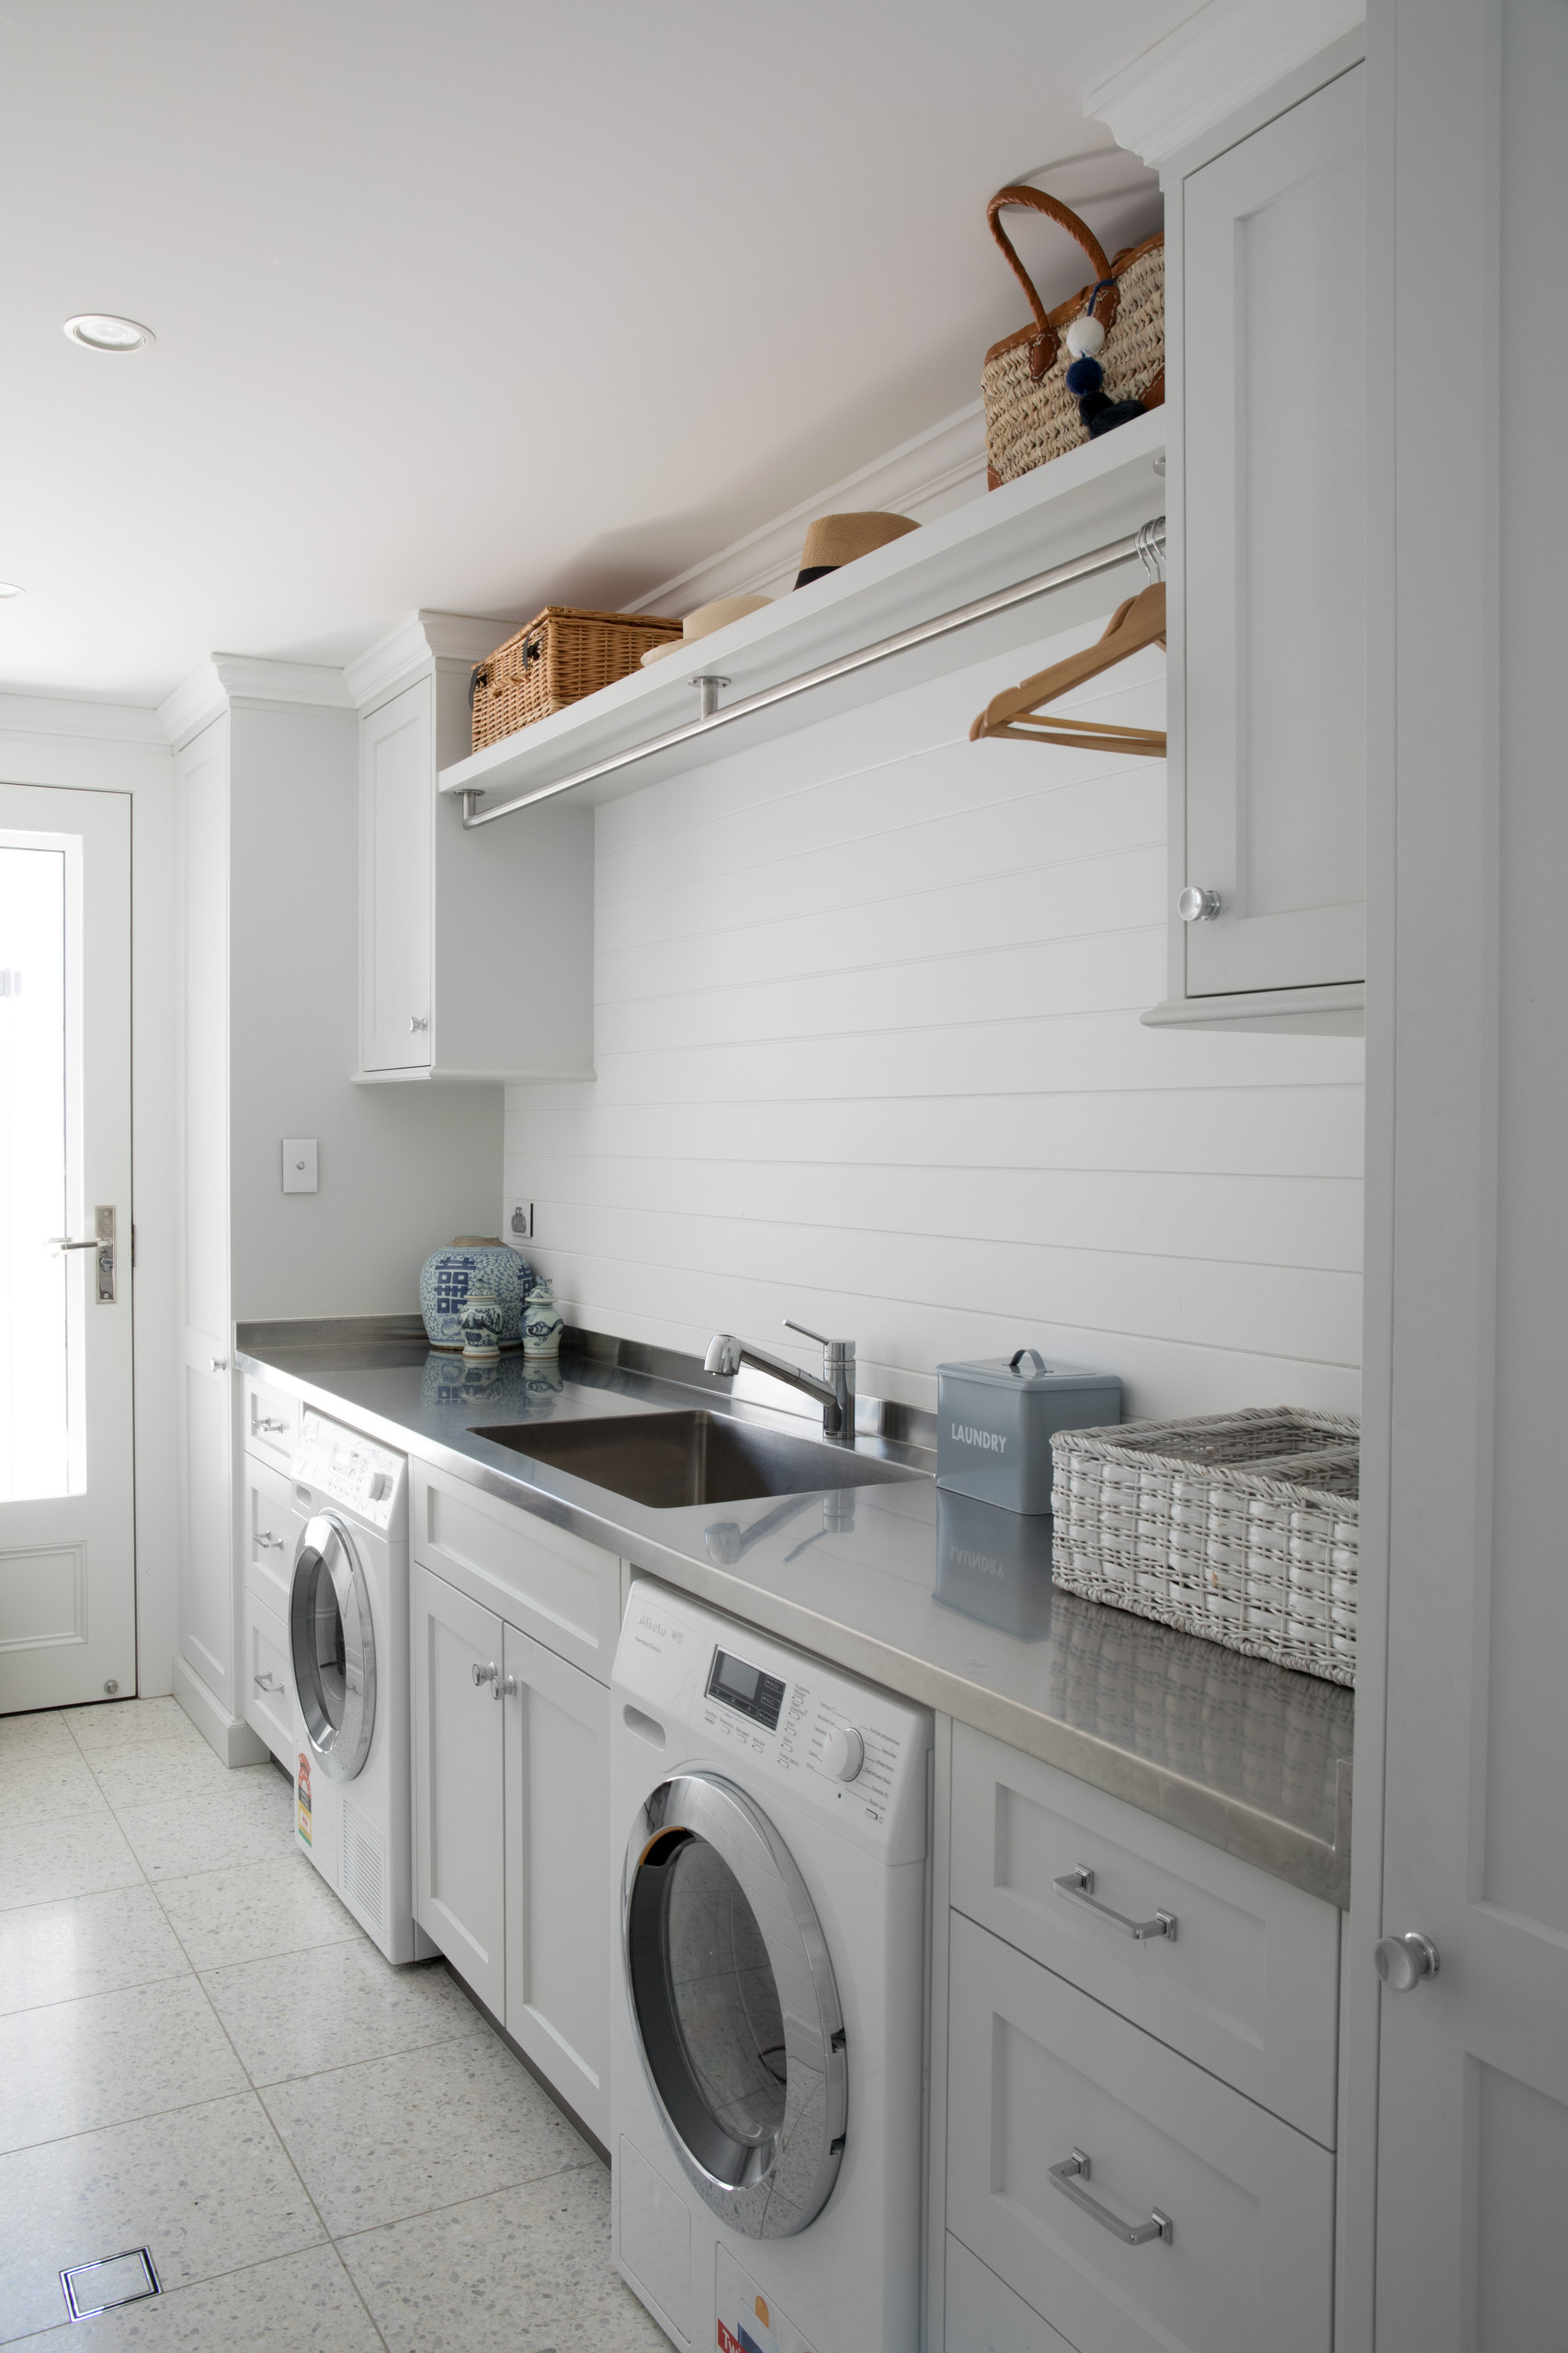 https://st.hzcdn.com/simgs/pictures/laundry-rooms/classic-home-wyer-craw-img~0cc166e70eb38cc2_14-2961-1-8868785.jpg